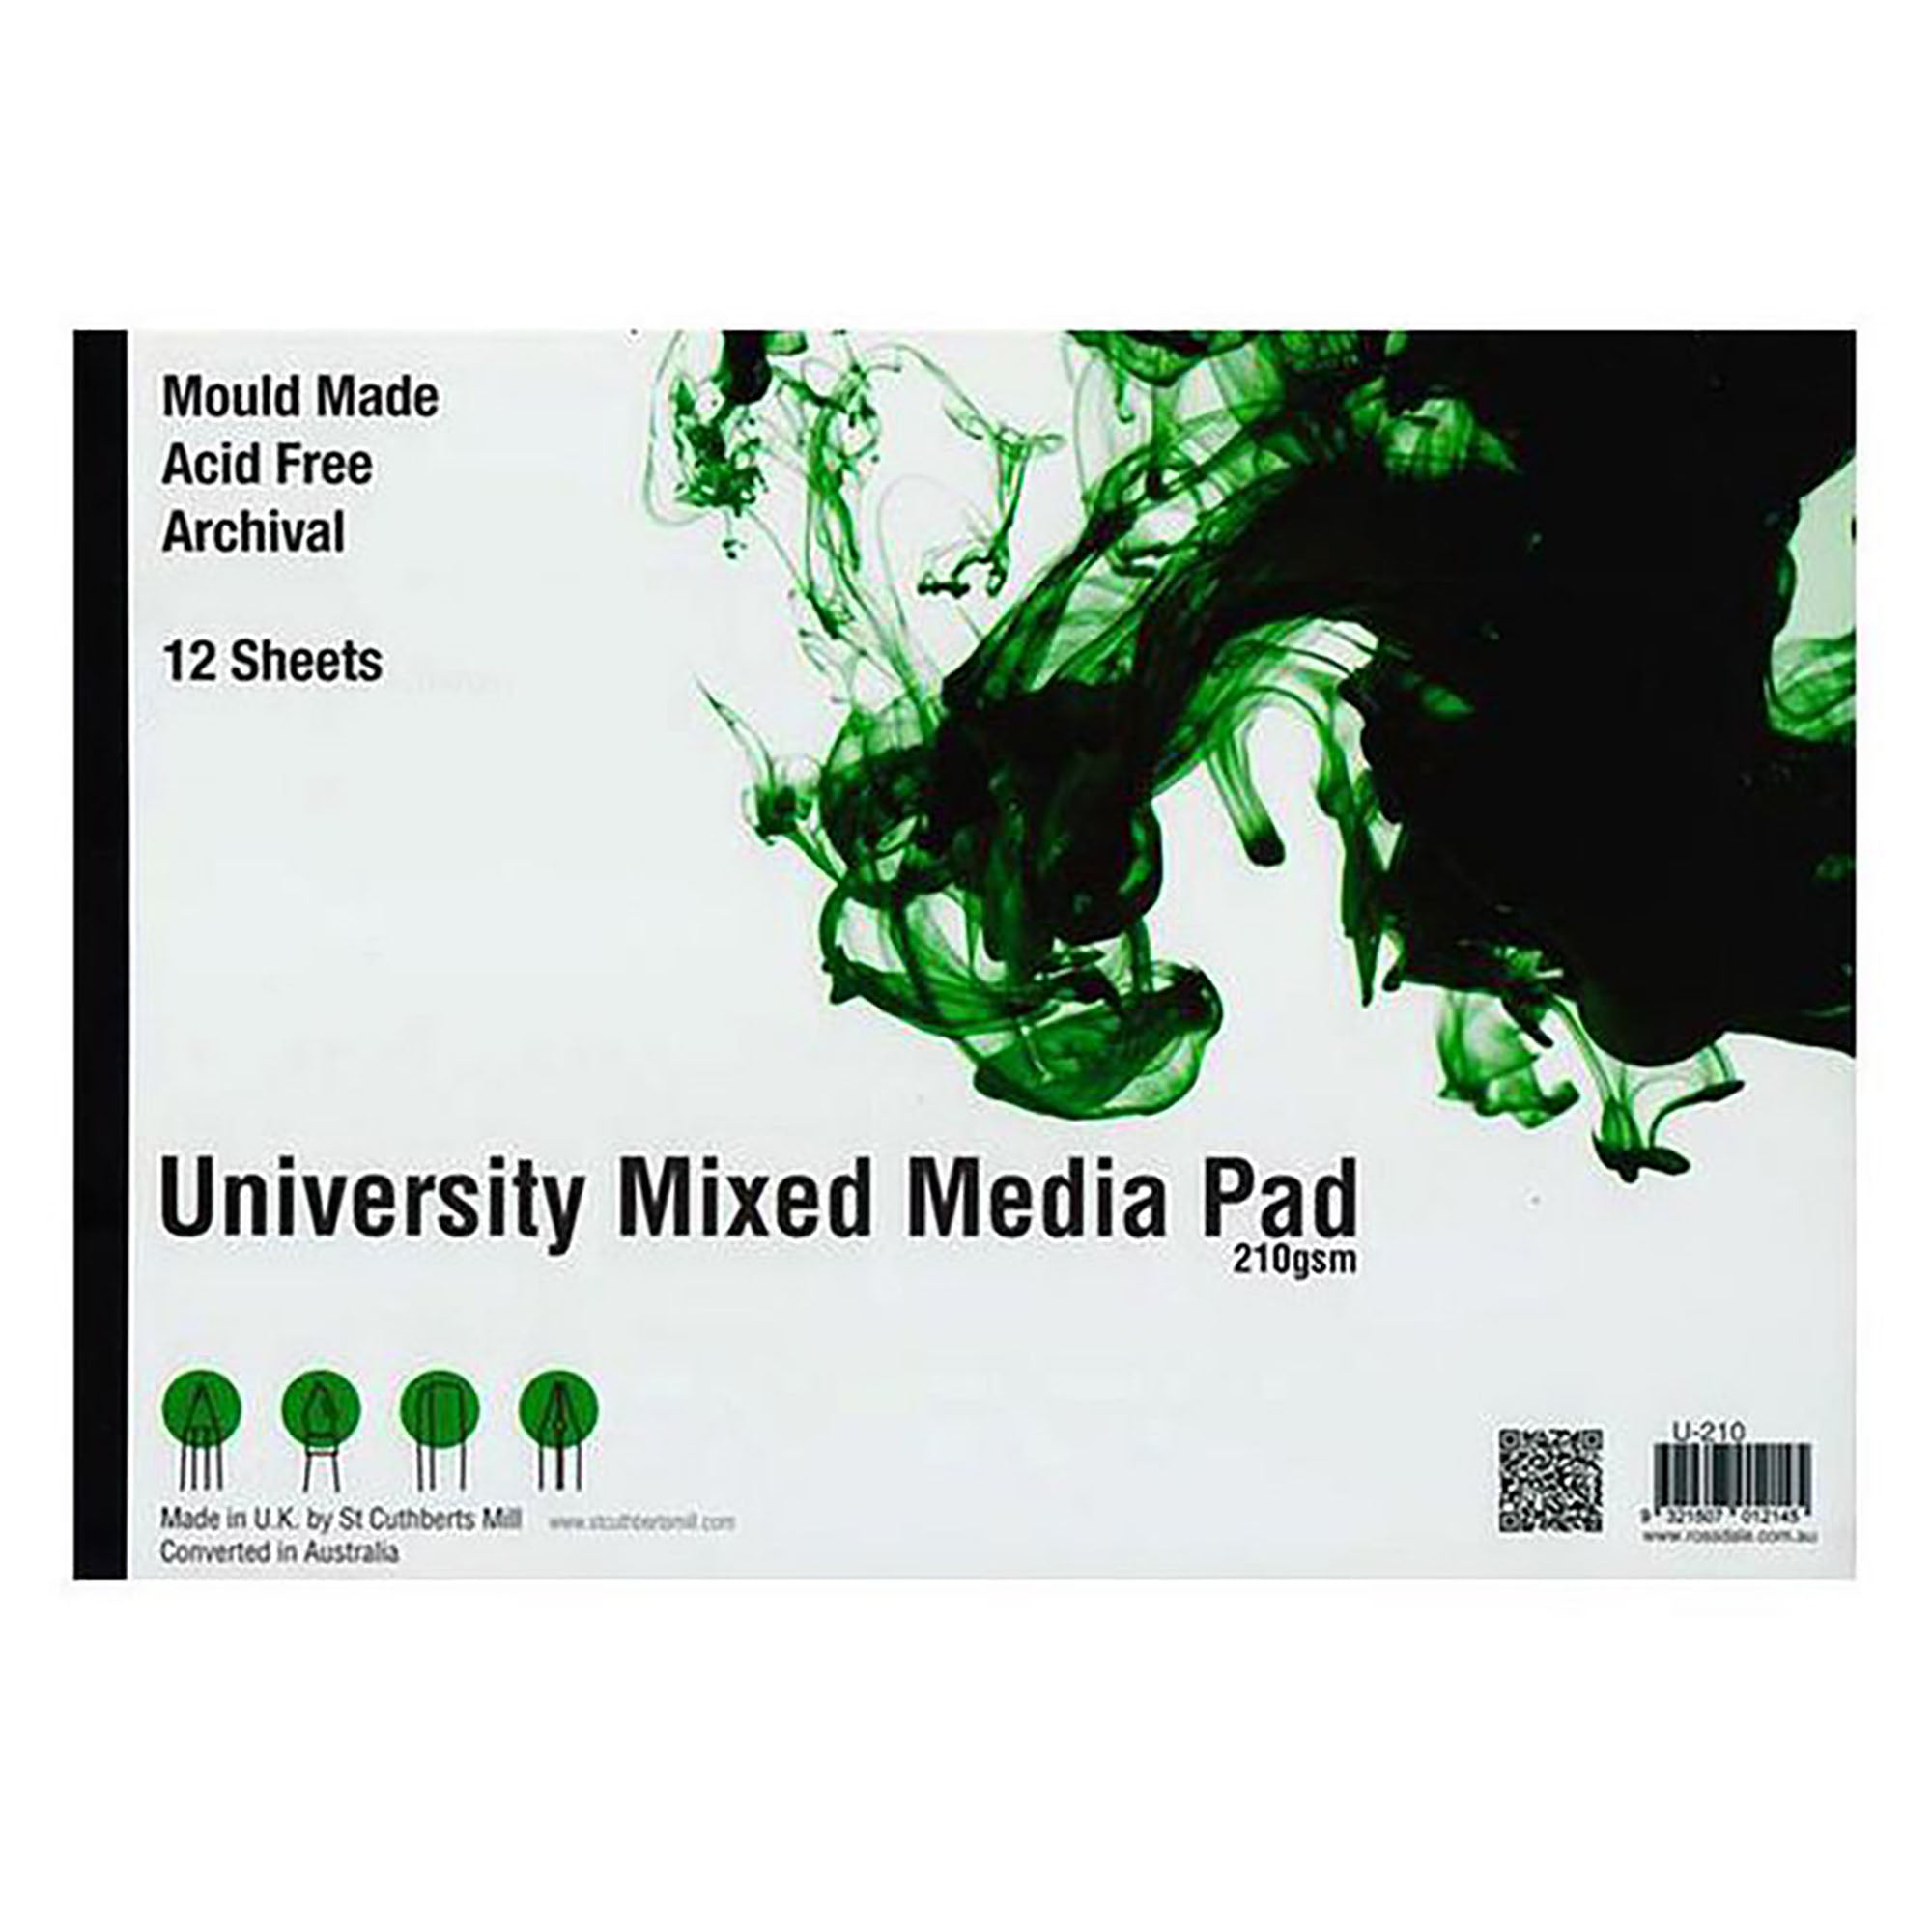 St Cuthberts Mill University A3 Pad 210gsm (12 sheets)